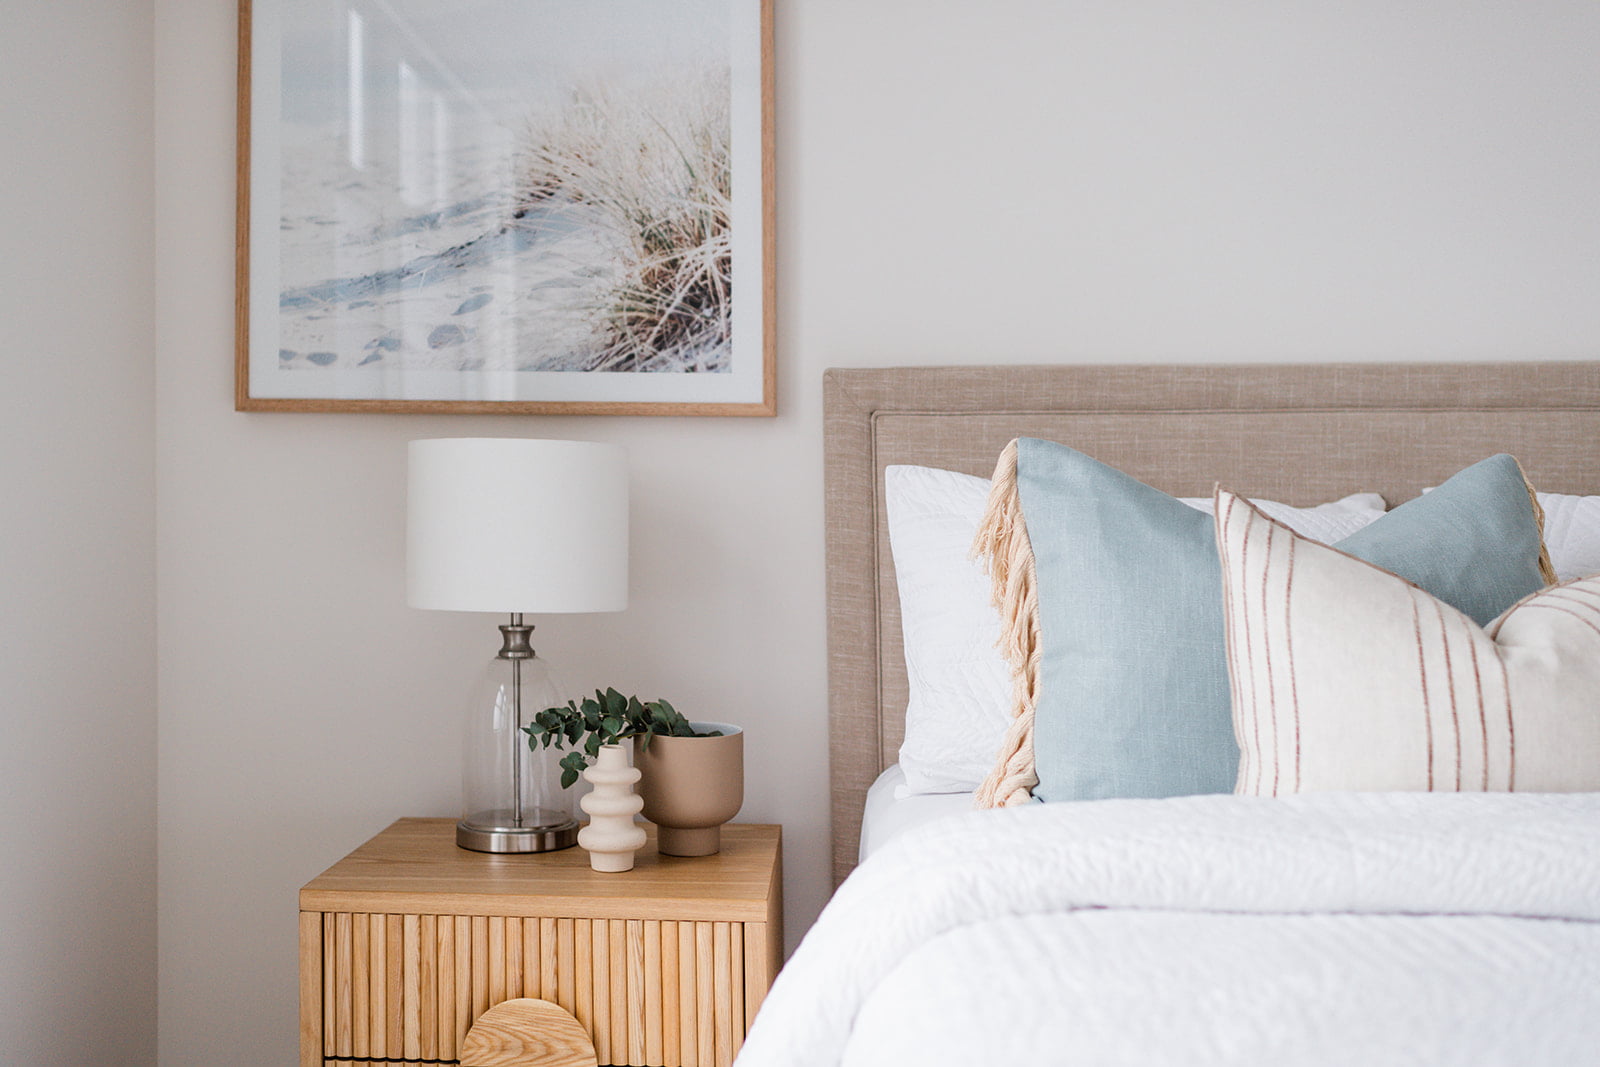 Bed with pink cushions, grey throw, white linen. Timber bedside tables with woven white table lamps. Grey bedhead with centred artwork above with hues of pink, blue and navy.